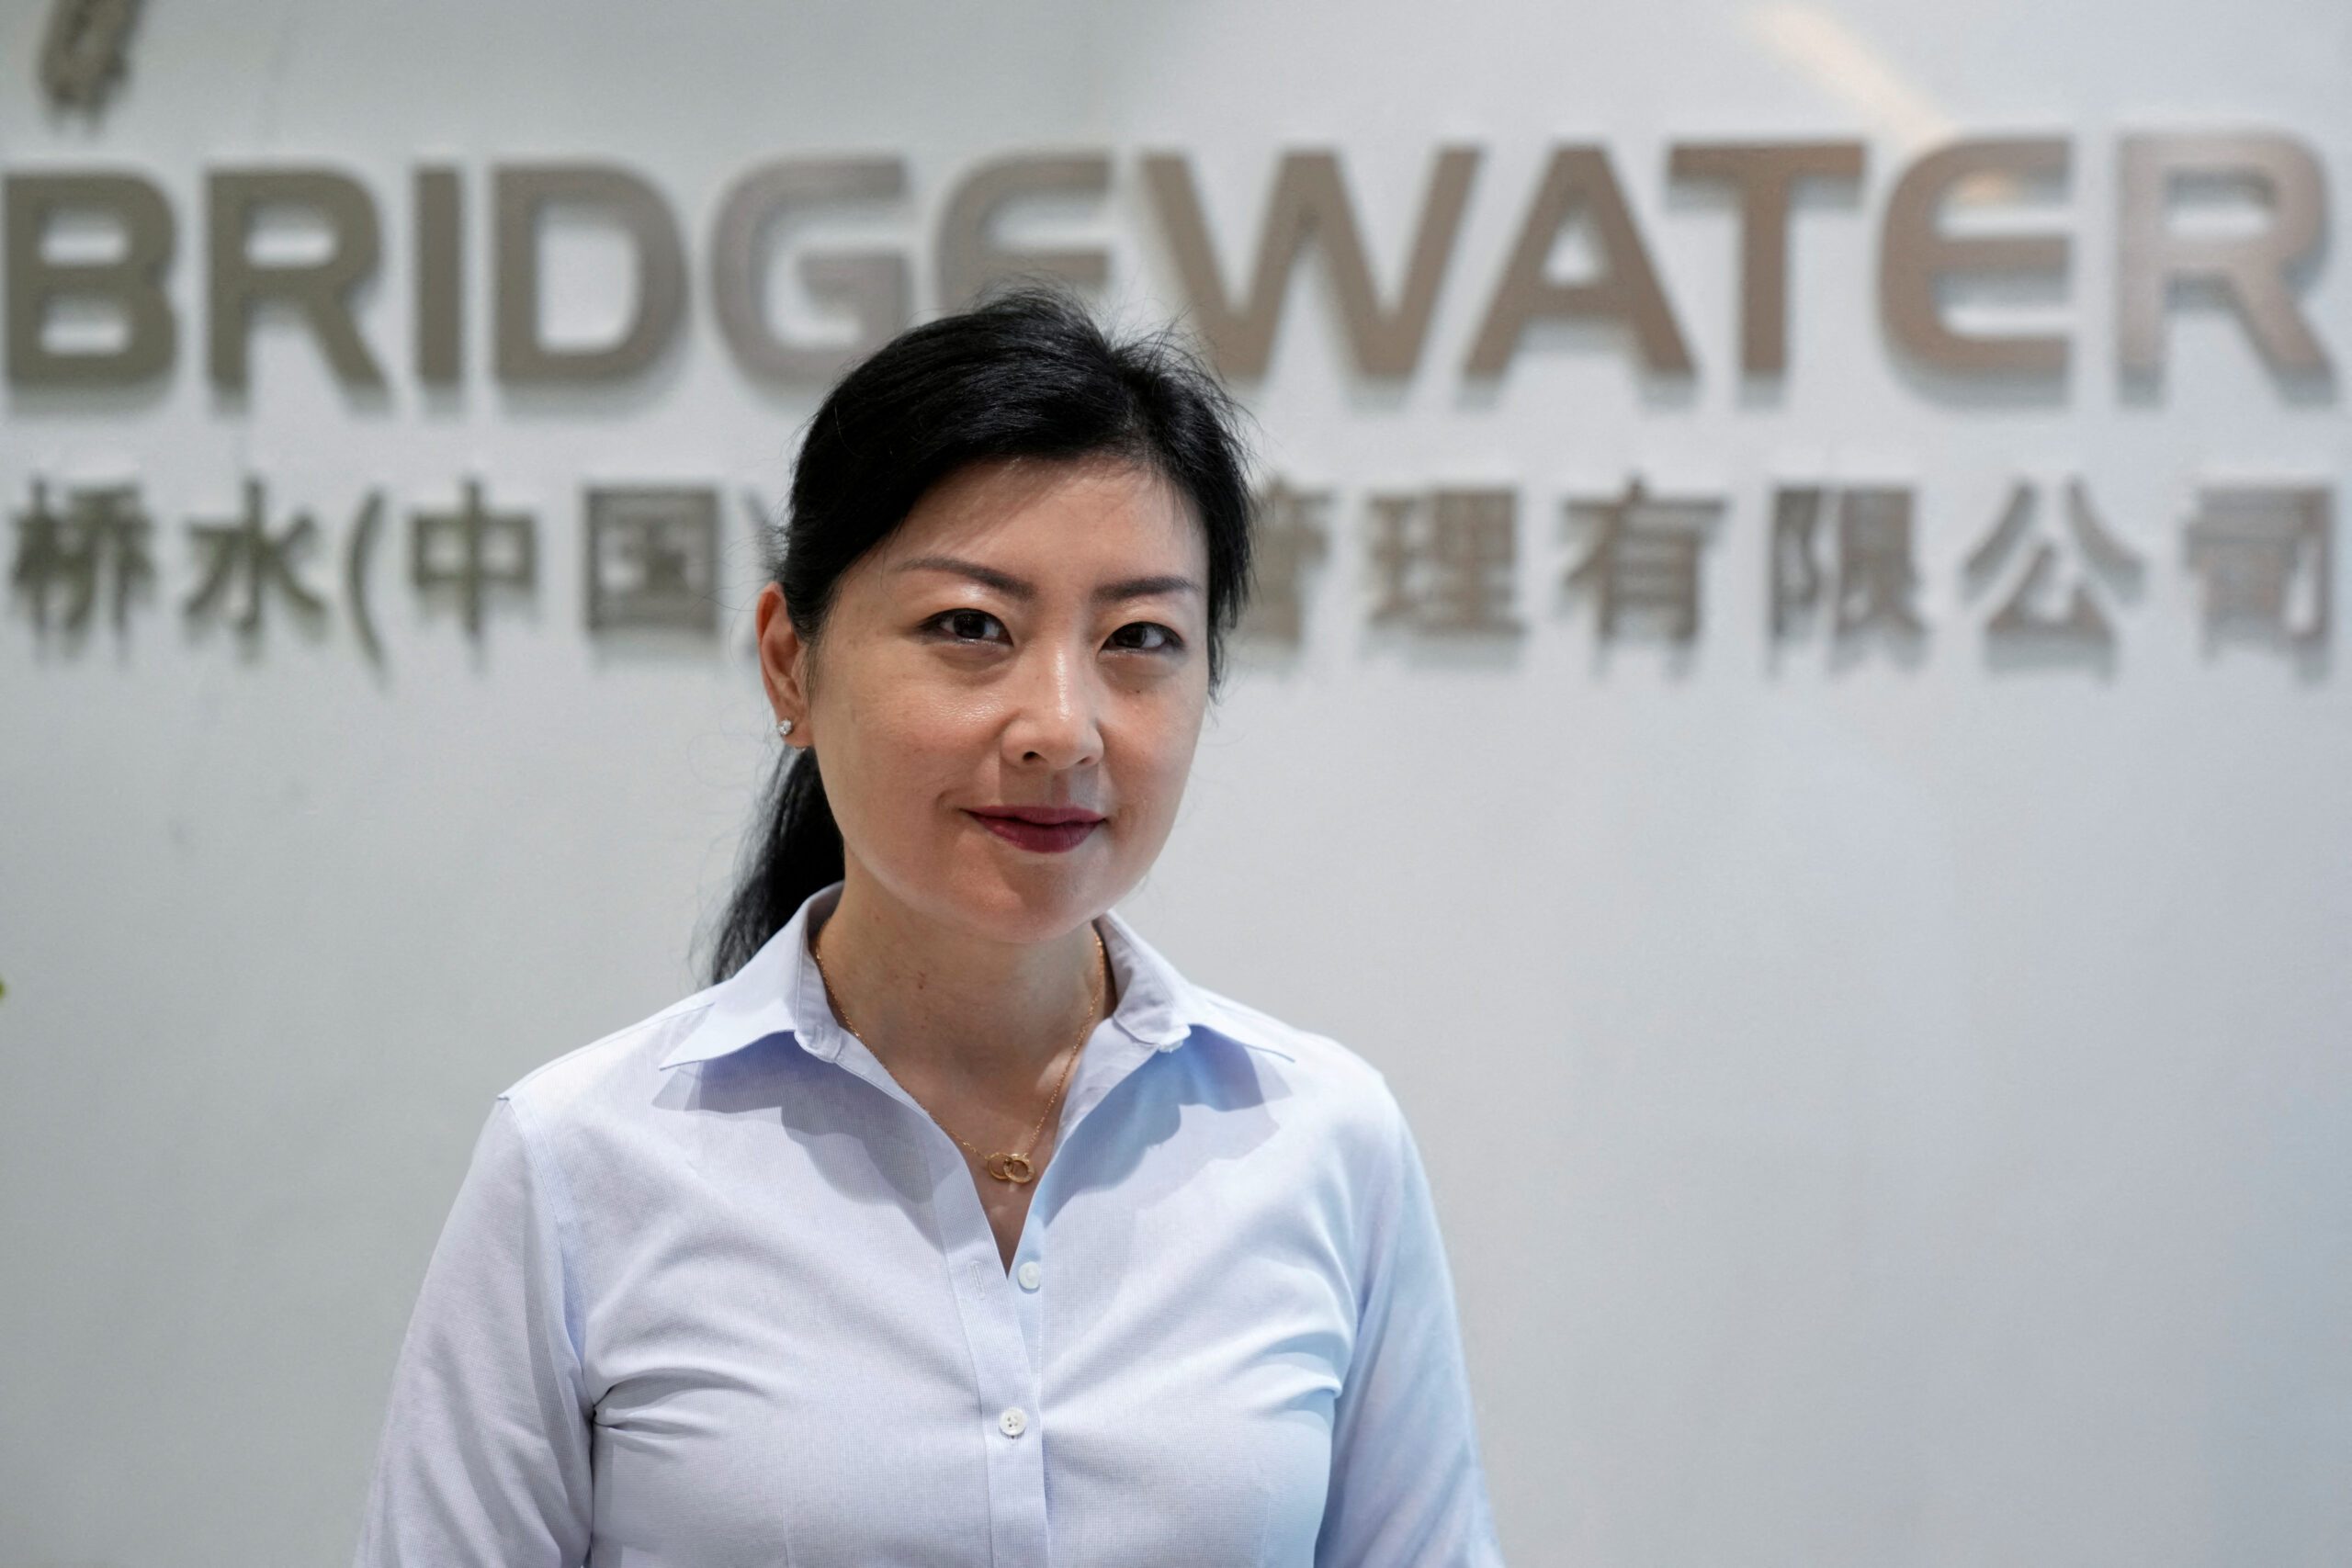 Bridgewater appoints China head Alpert to oversee new investment unit